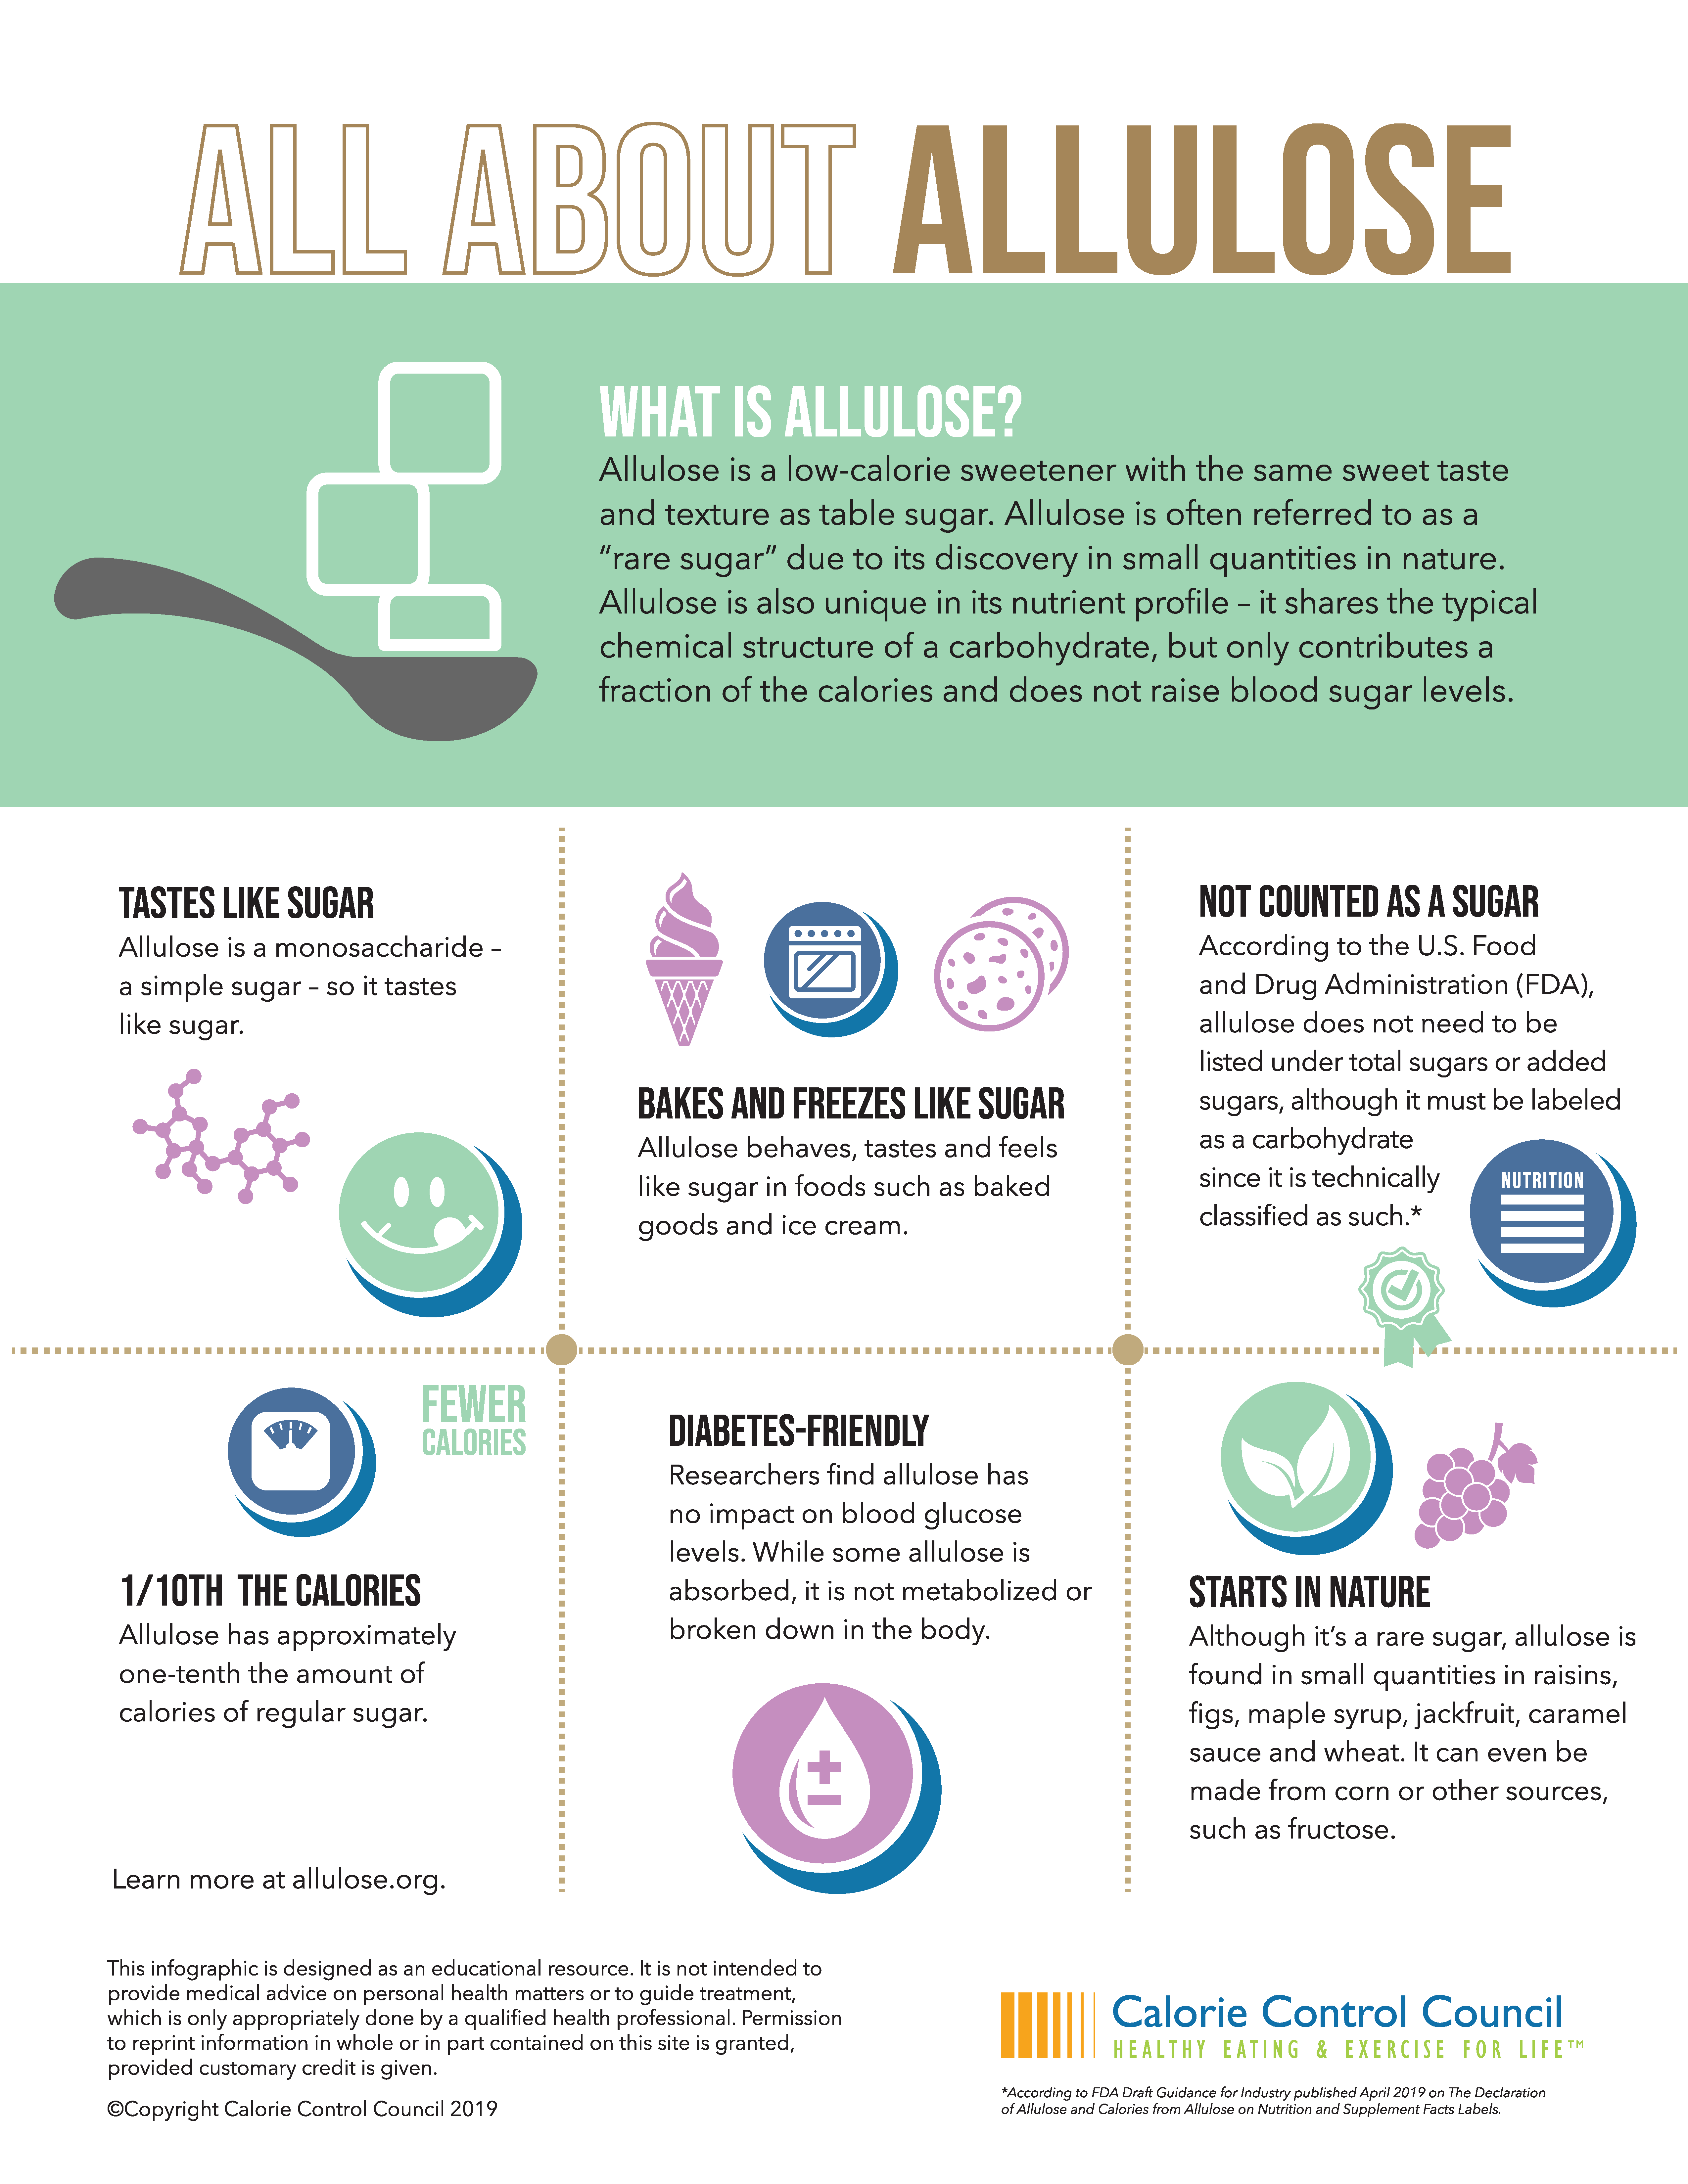 http://allulose.org/wp-content/uploads/2019/10/CCCAlluloseInfographic.png